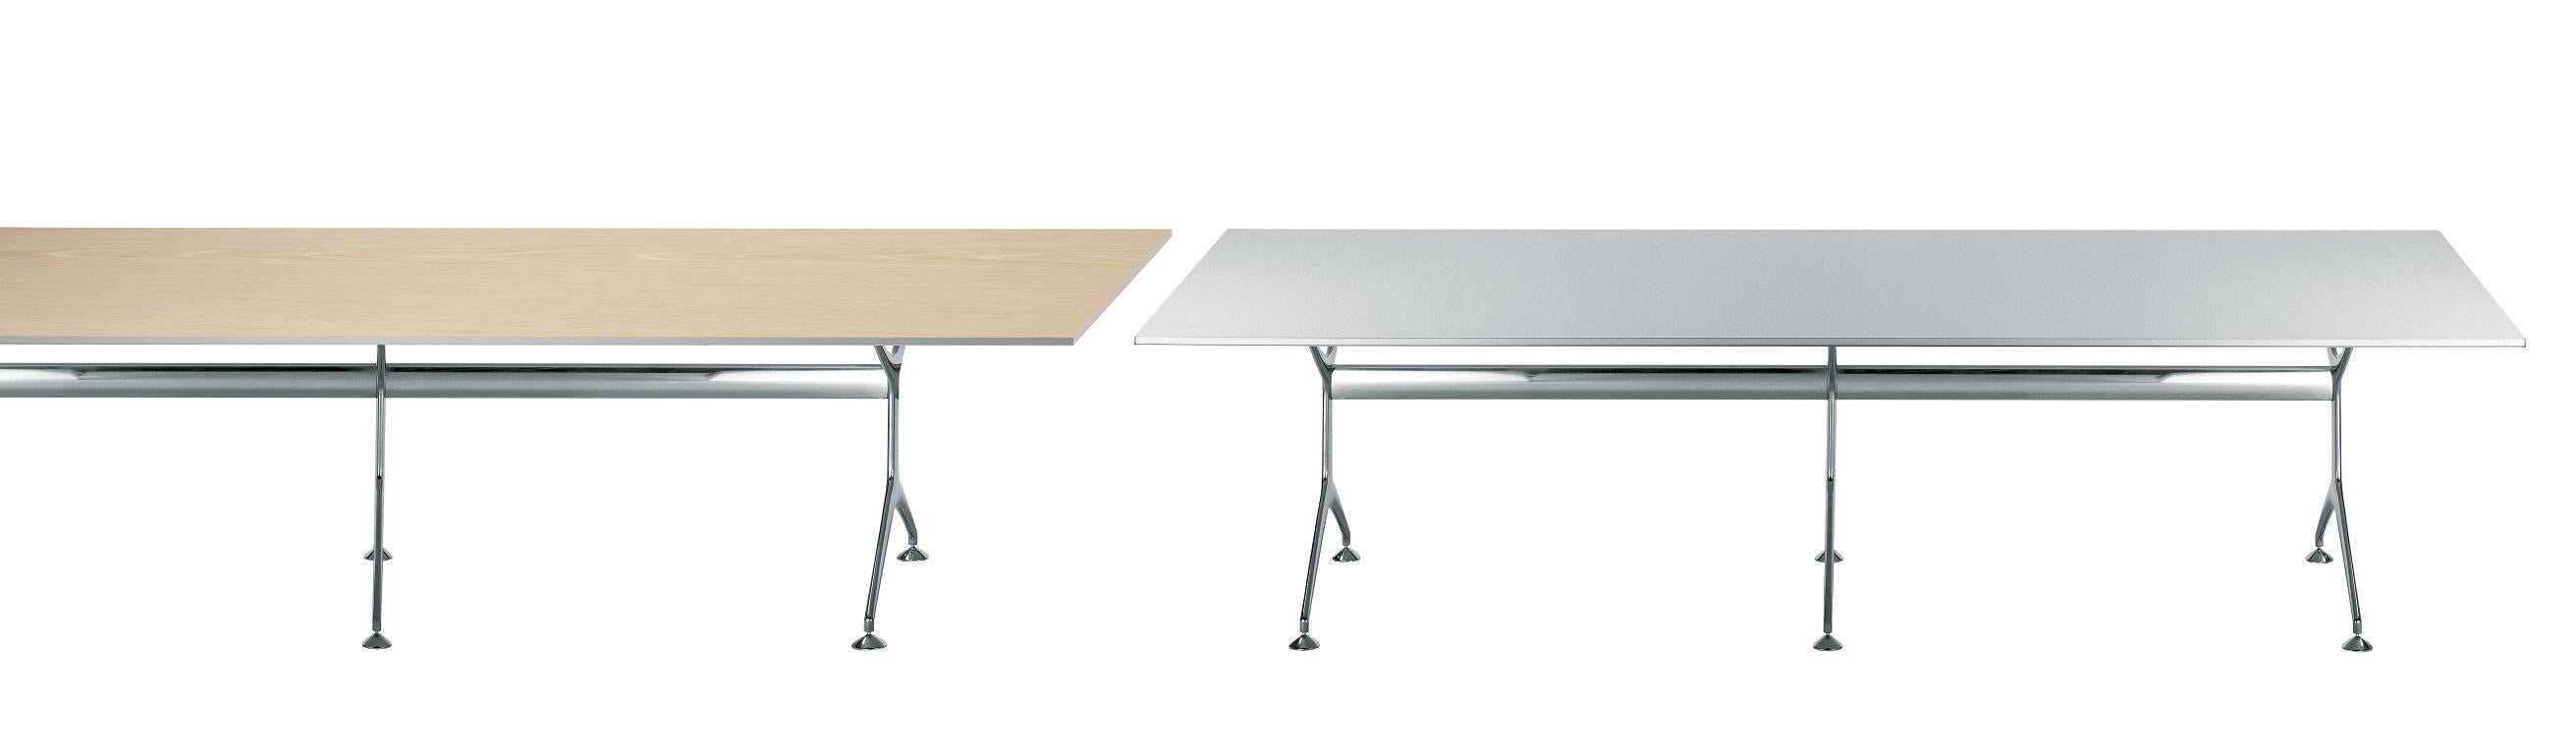 Alias Frametable 295XL in Whitened Oak Top with Polished Aluminium Frame by Alberto Meda

Fixed table with structure made of die-cast aluminium elements, with lacquered or polished finish.
Top in: - Extra light tempered glass, thickness 12 mm